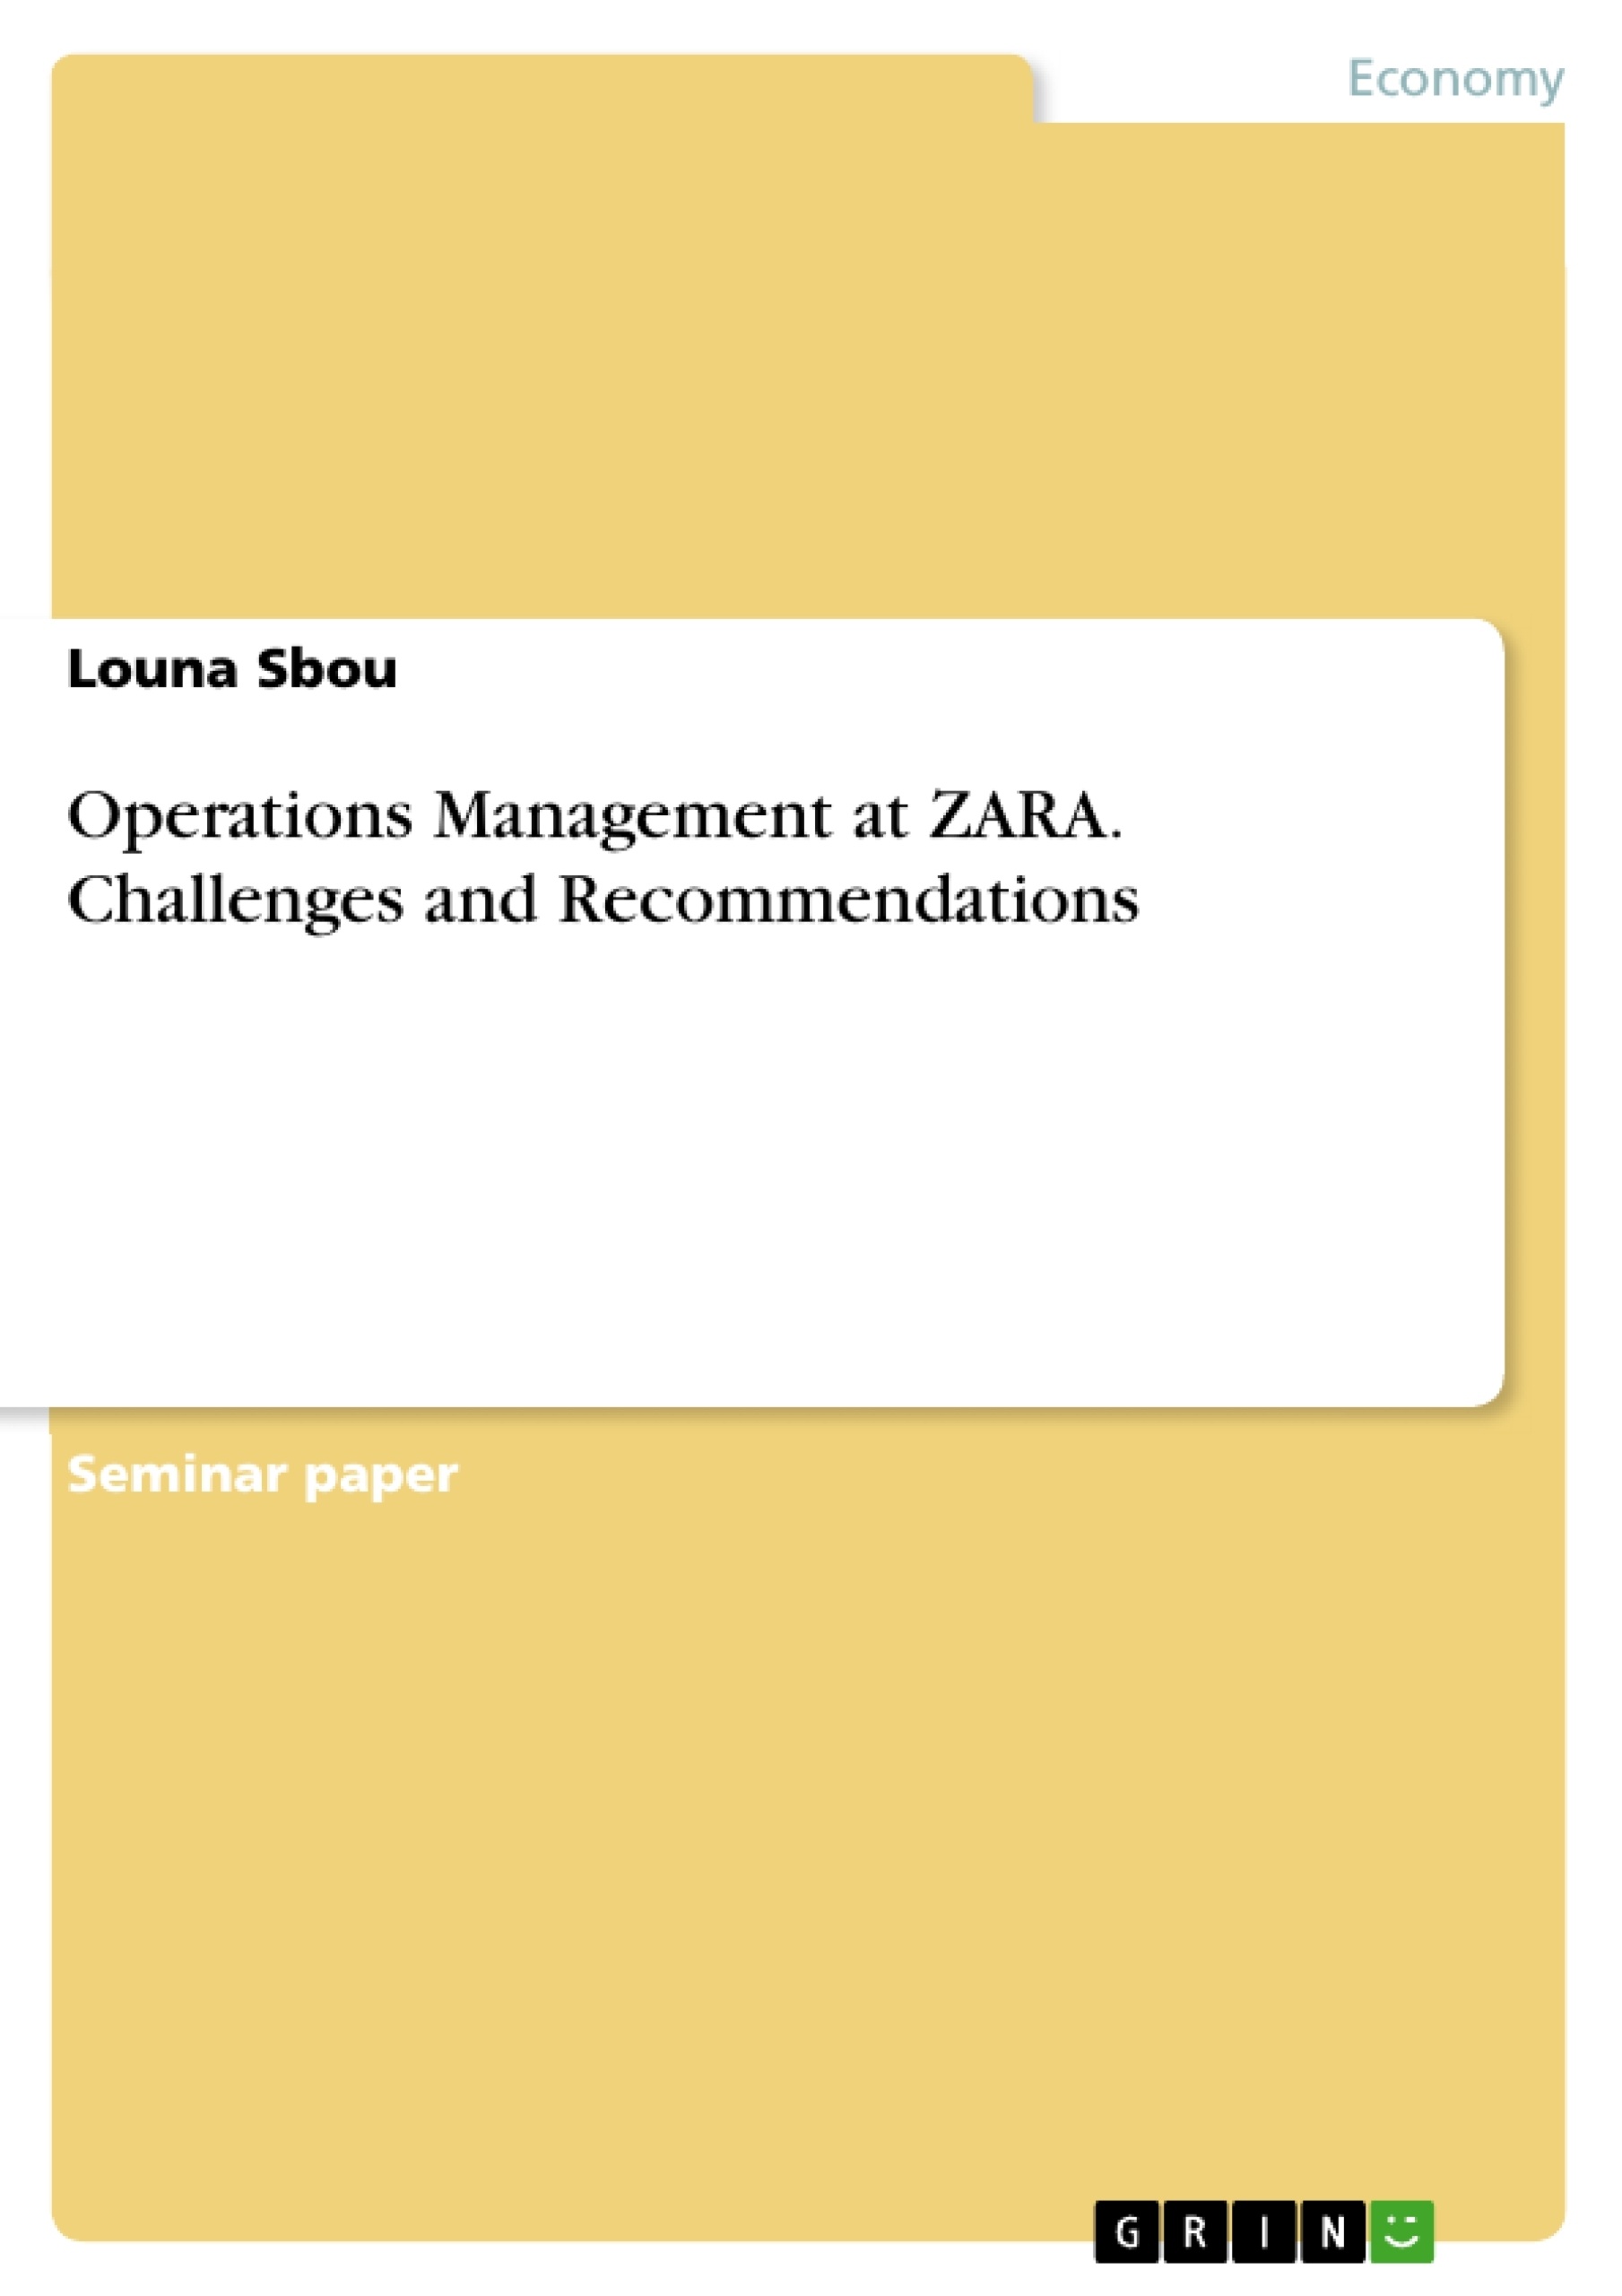 Título: Operations Management at ZARA. Challenges and Recommendations